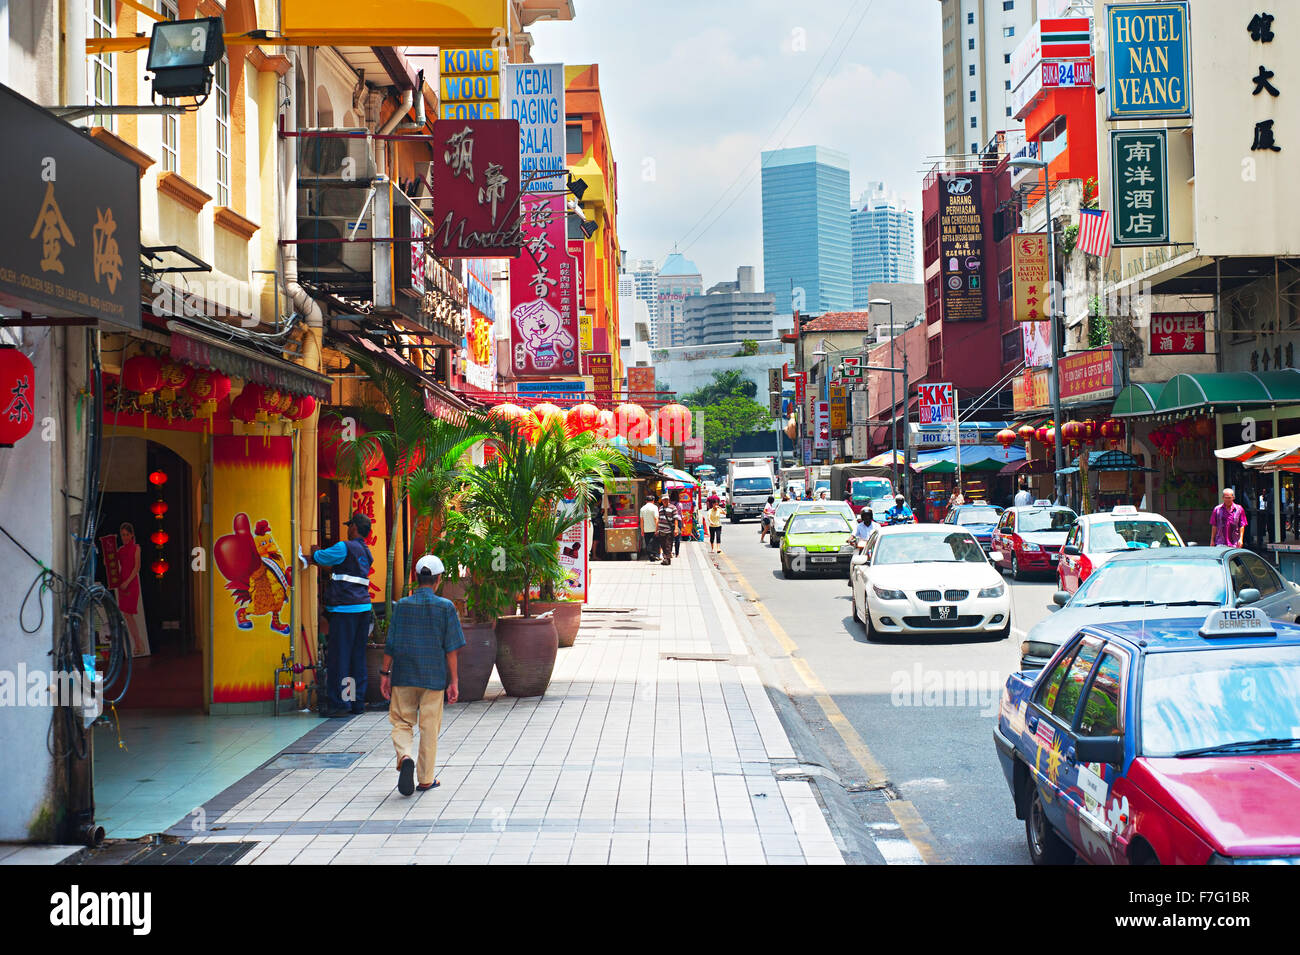 Chinatown street in Kuala Lumpur. KL is the capital and most populous city in Malaysia. Stock Photo